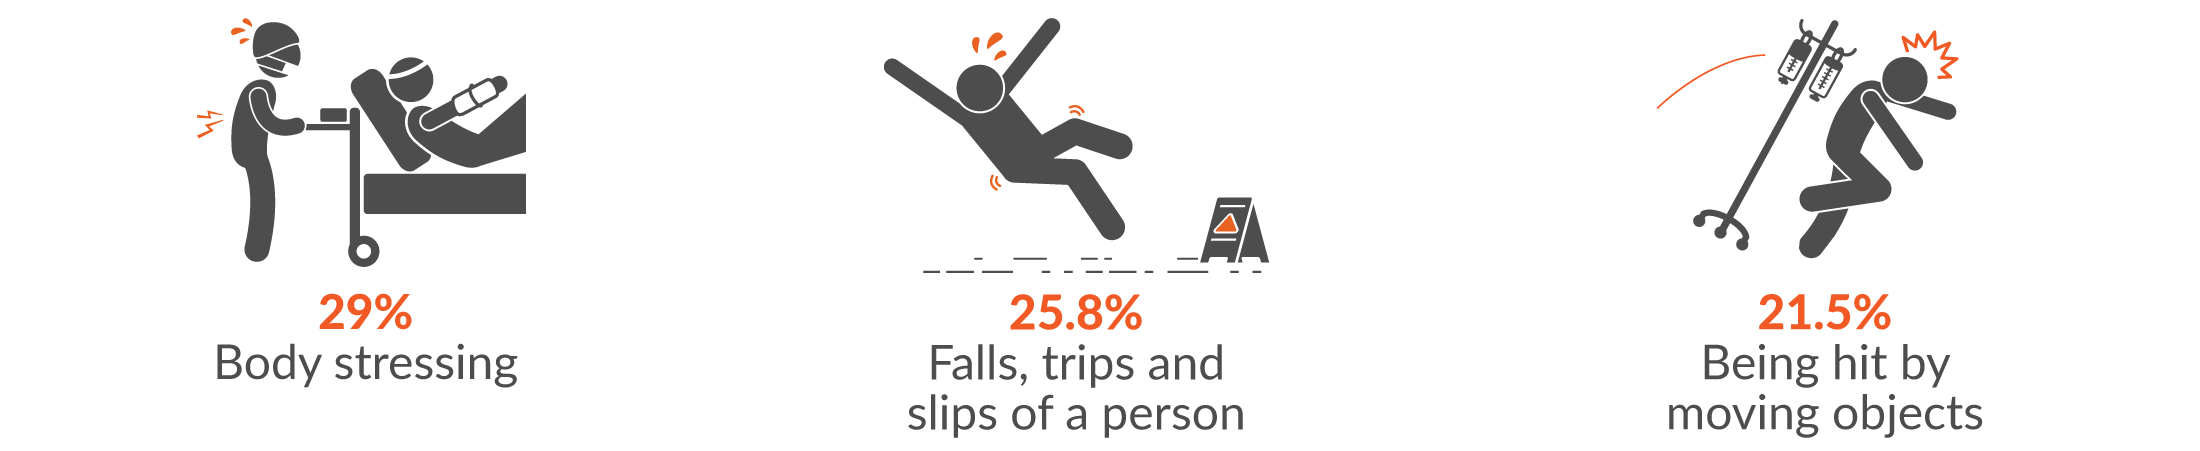 This infographic shows the main three mechanisms of injury for health and community services claims were 33.5% body stressing; 27% being hit by moving object; and 23.3% falls, trips and slips of a person.